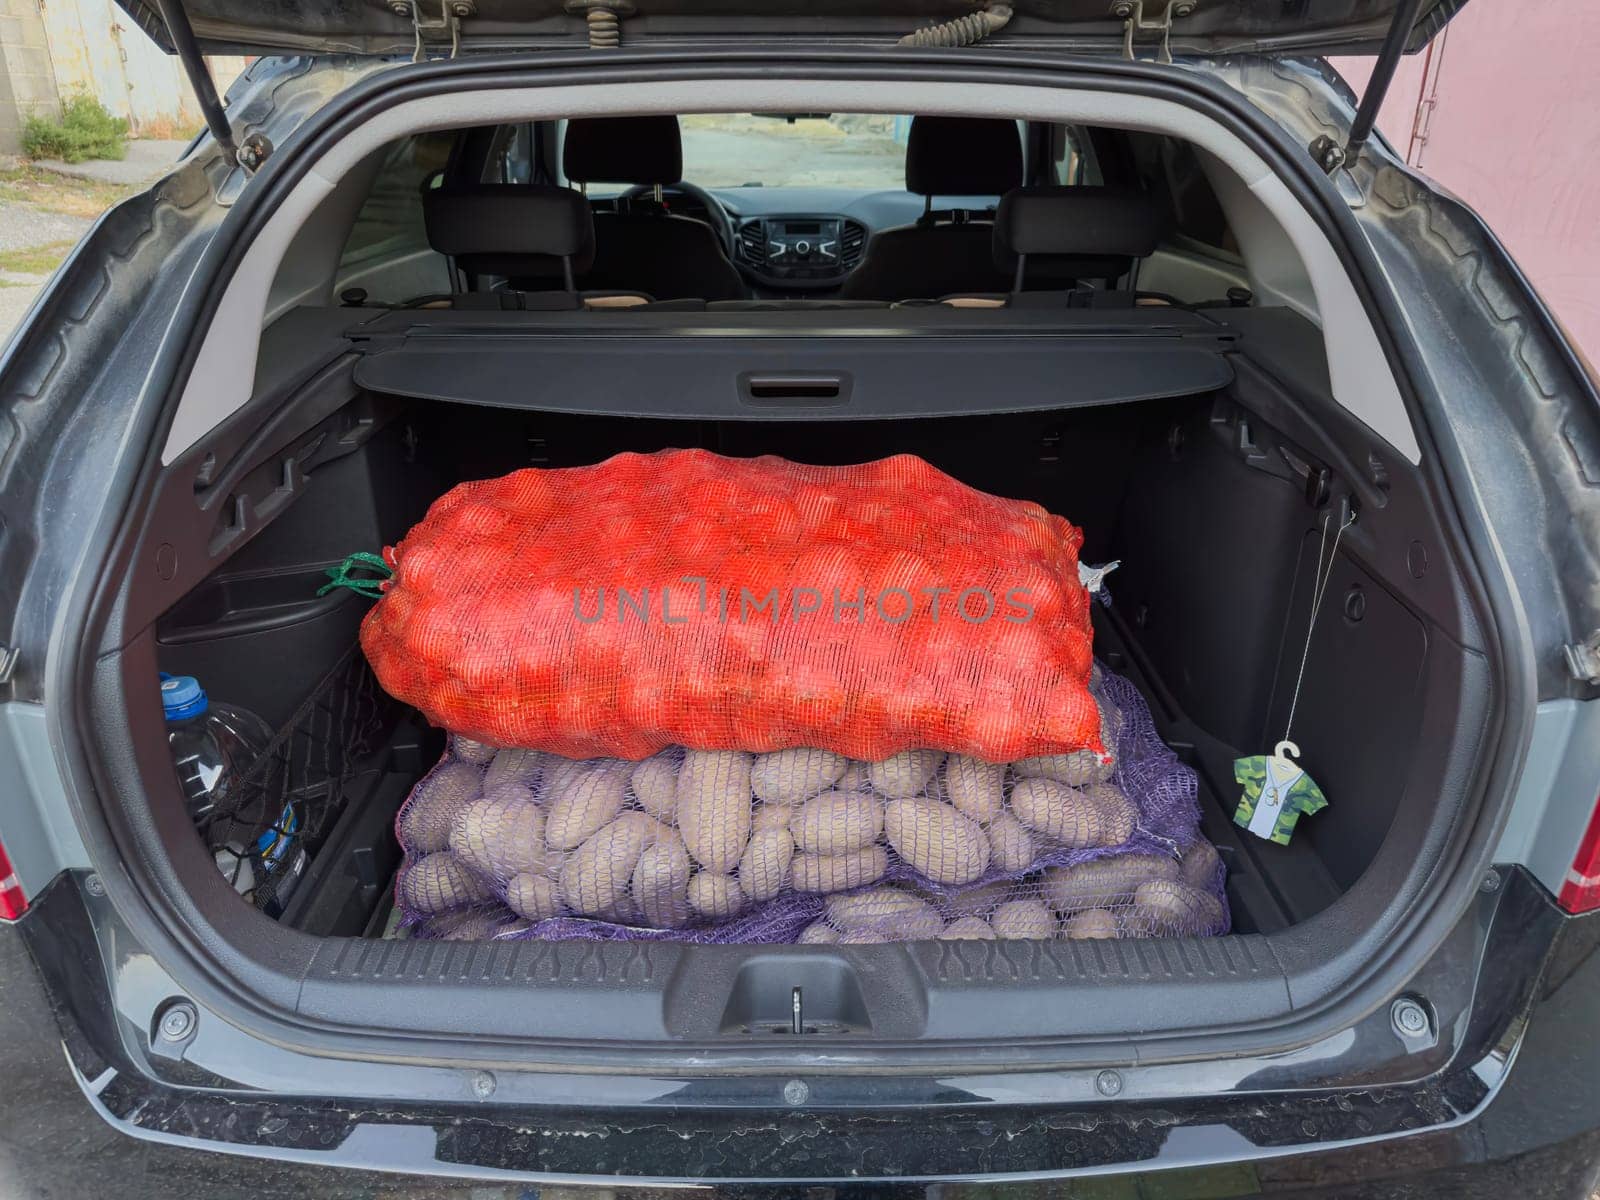 Bags of potatoes in the trunk of the car. photo